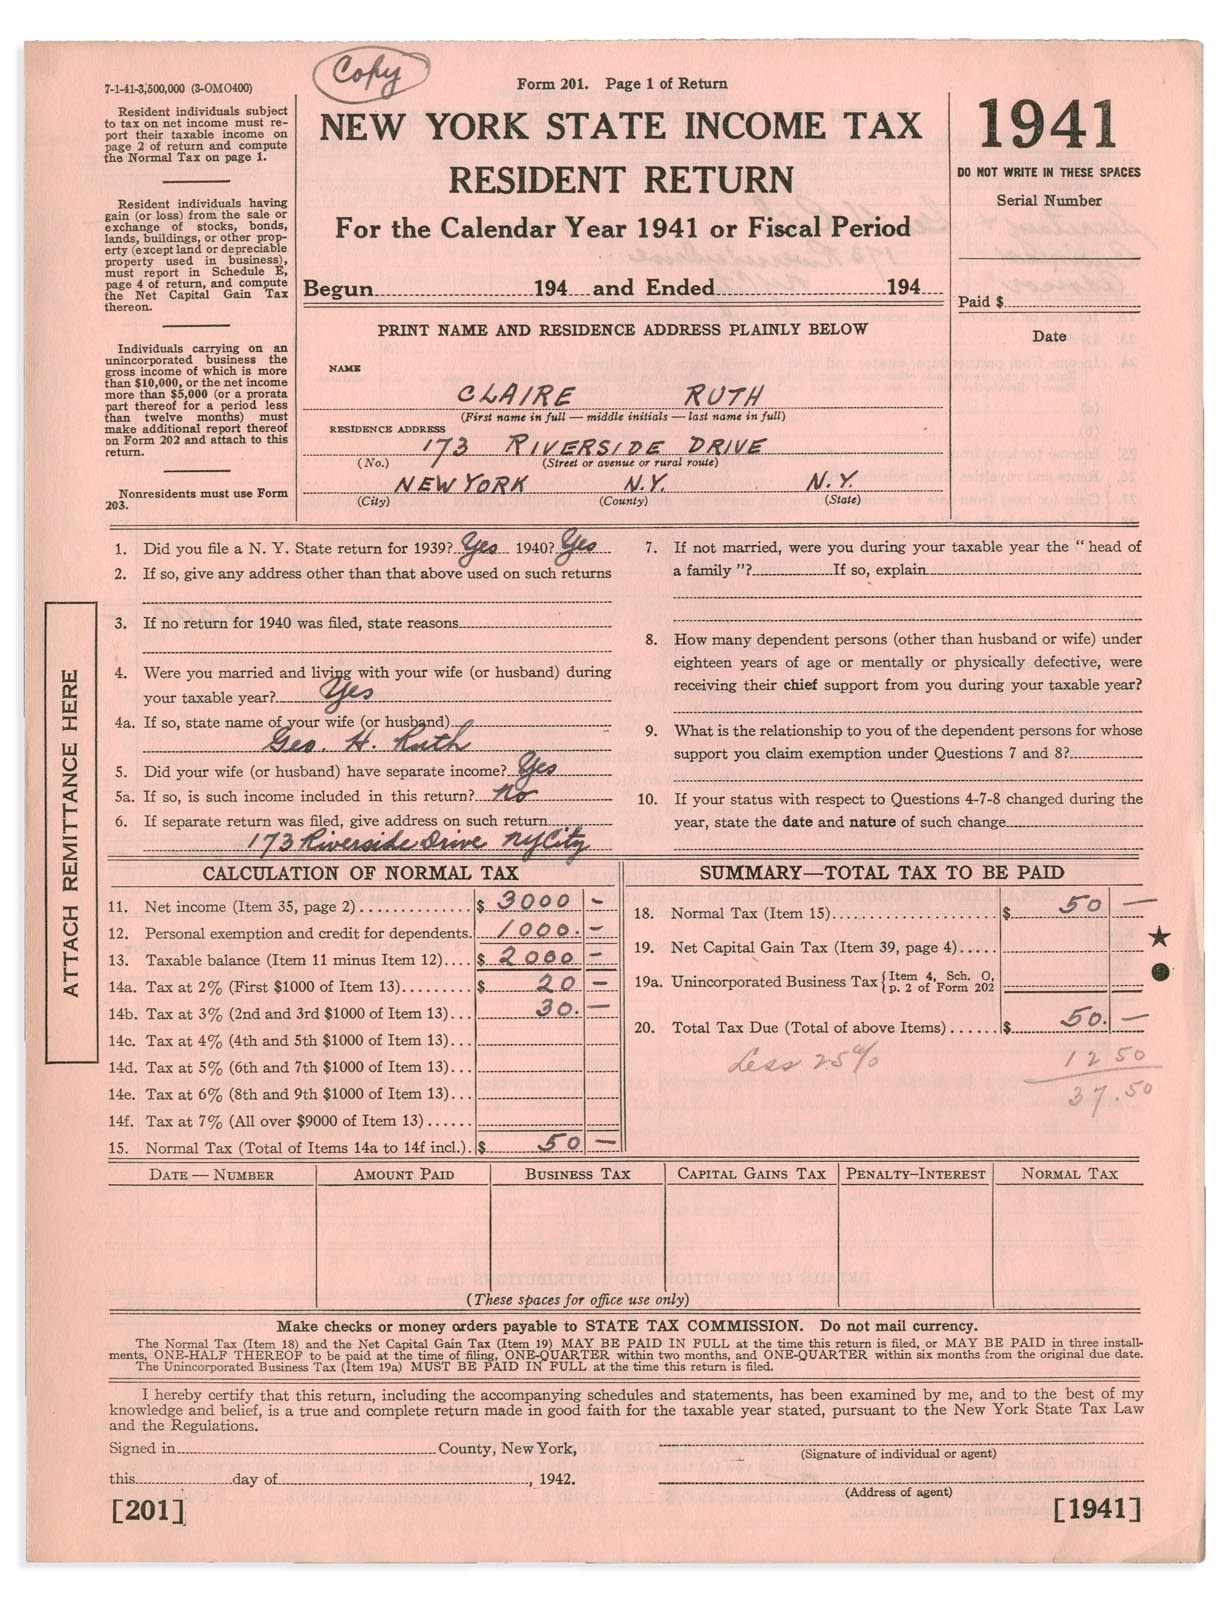 Collection Of Babe Ruth's Right Hand Man - 1939-41 Claire Ruth N.Y. State Income Tax Returns (3)